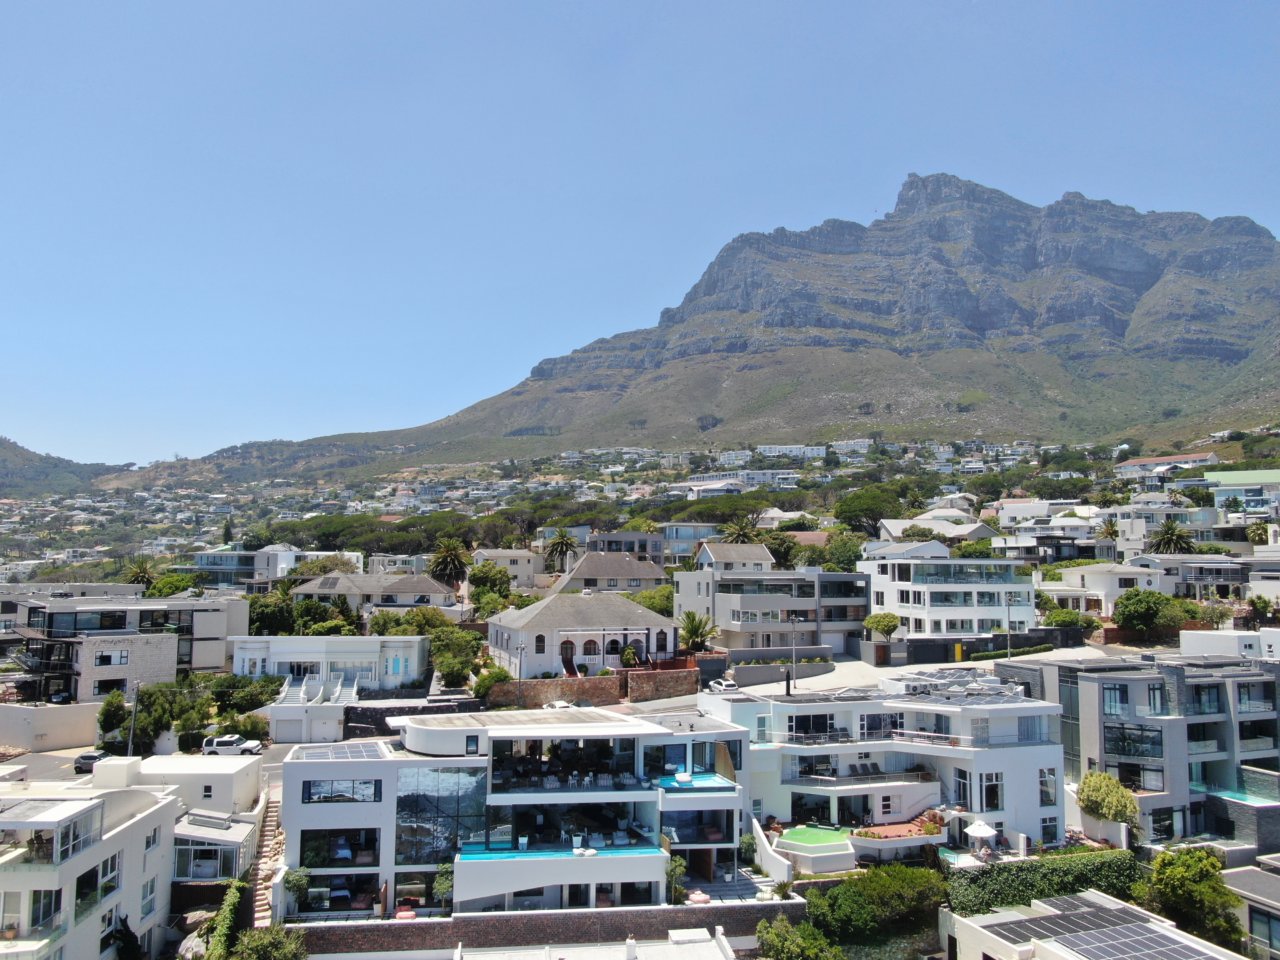 Photo 26 of Camps Bay Beach Villa accommodation in Camps Bay, Cape Town with 4 bedrooms and 4 bathrooms